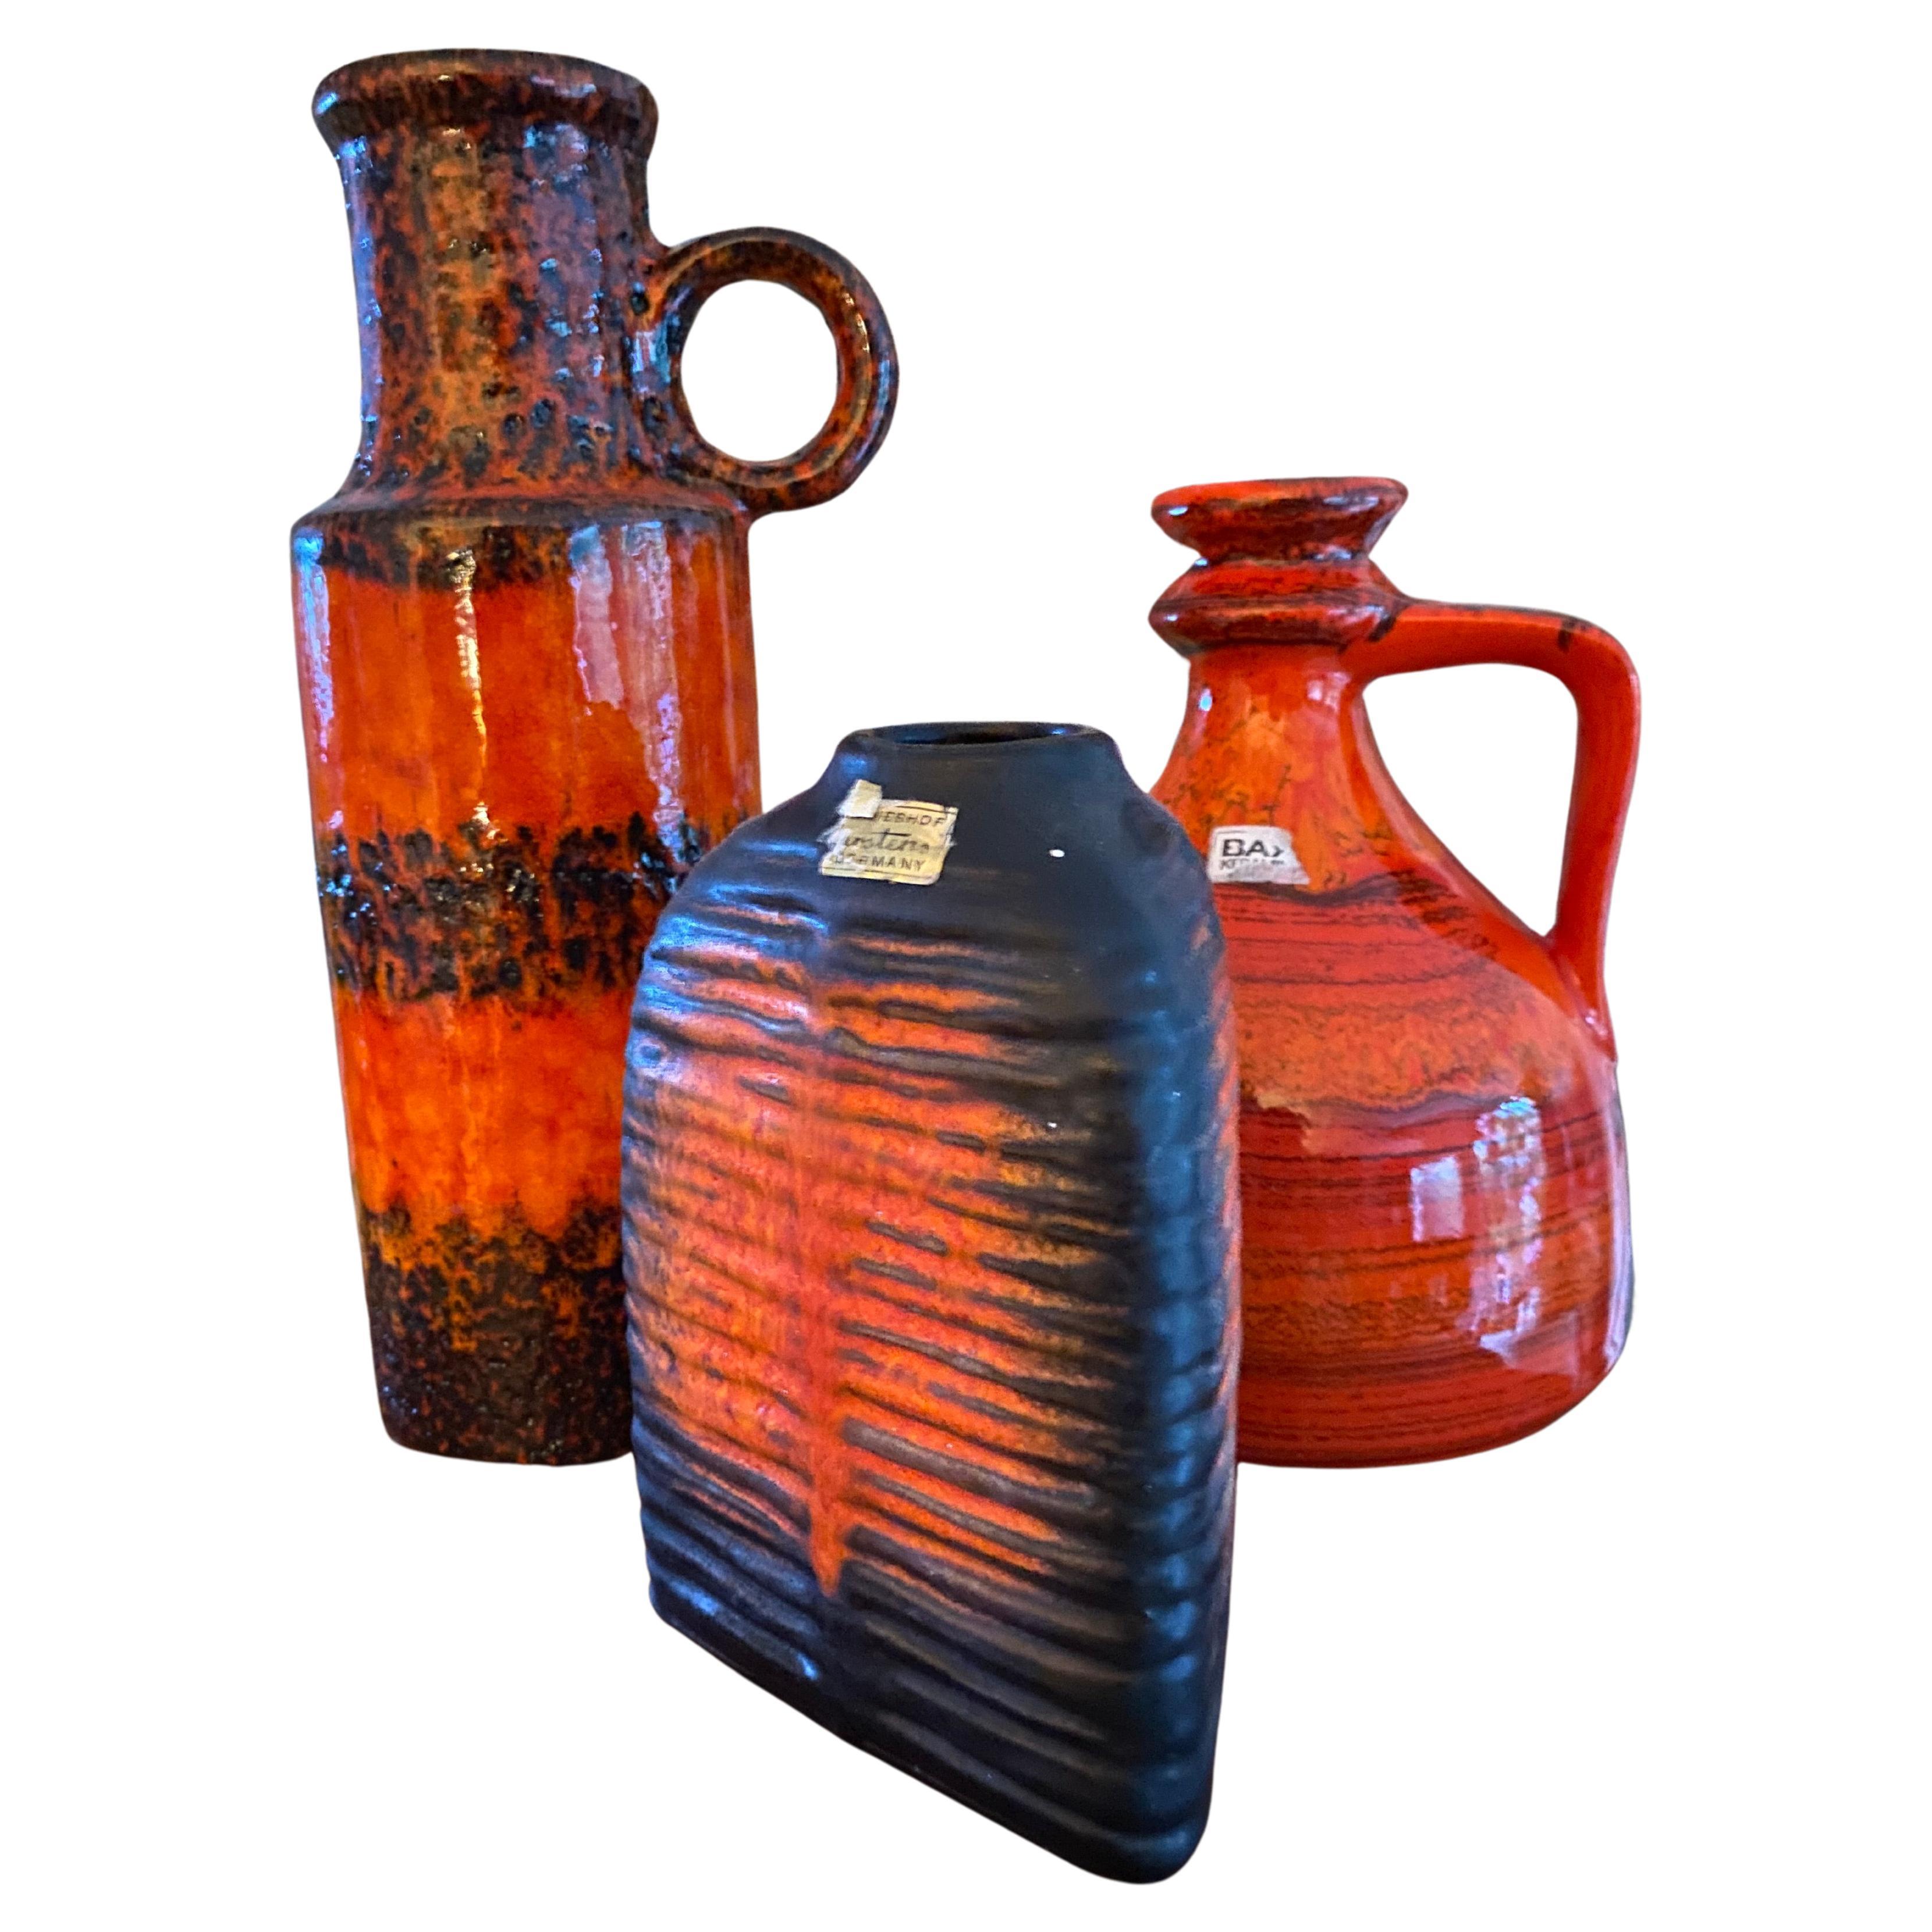 What is Scheurich Pottery?